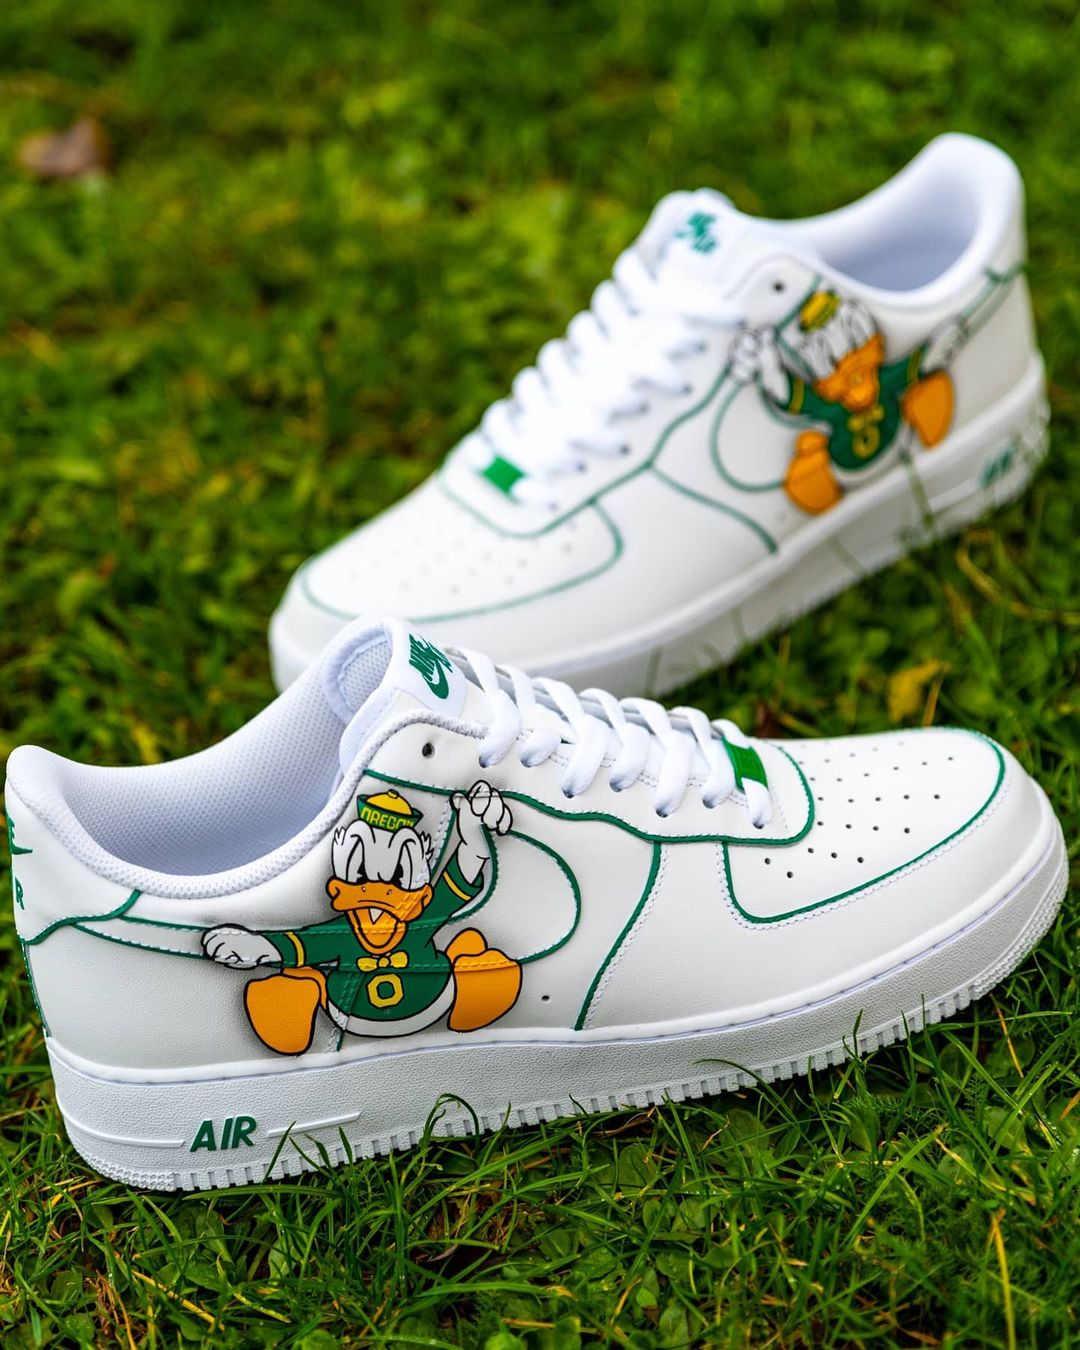 KarlsKicks - Custom painted lv Air force 1 🔥 Made for a customer 👍 Online  soon on karlskicks.com in all sizes #lv #airforce #nike #custommade  #customsneakers #customairforce #louisvuitton